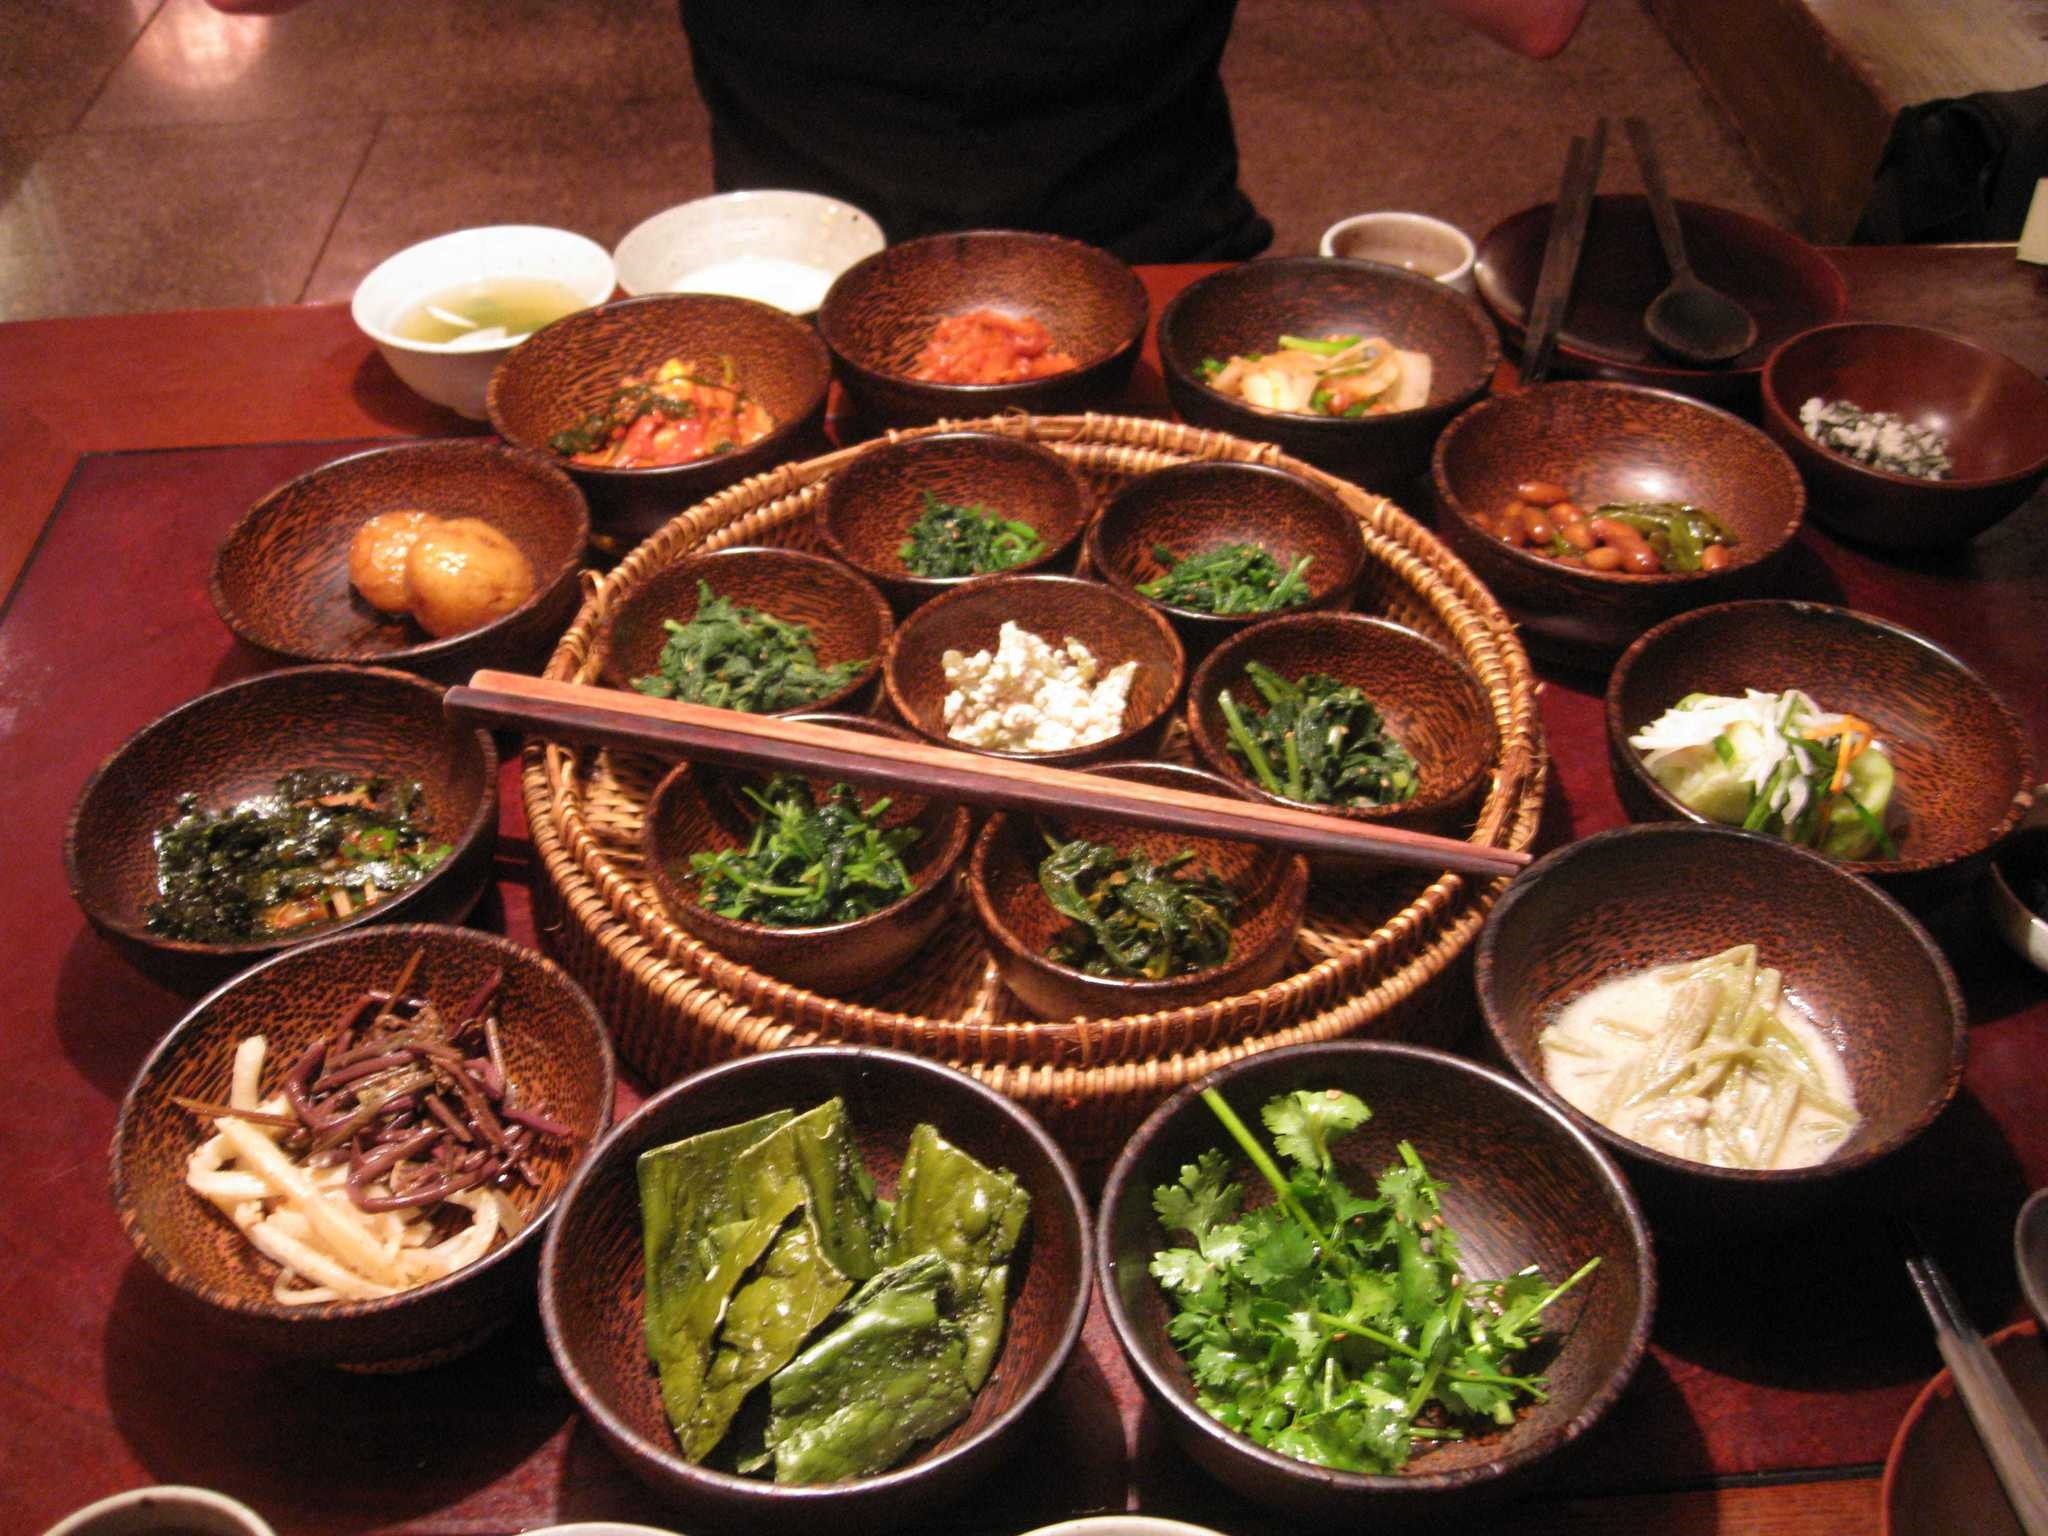 Flavors of Korea and Far East